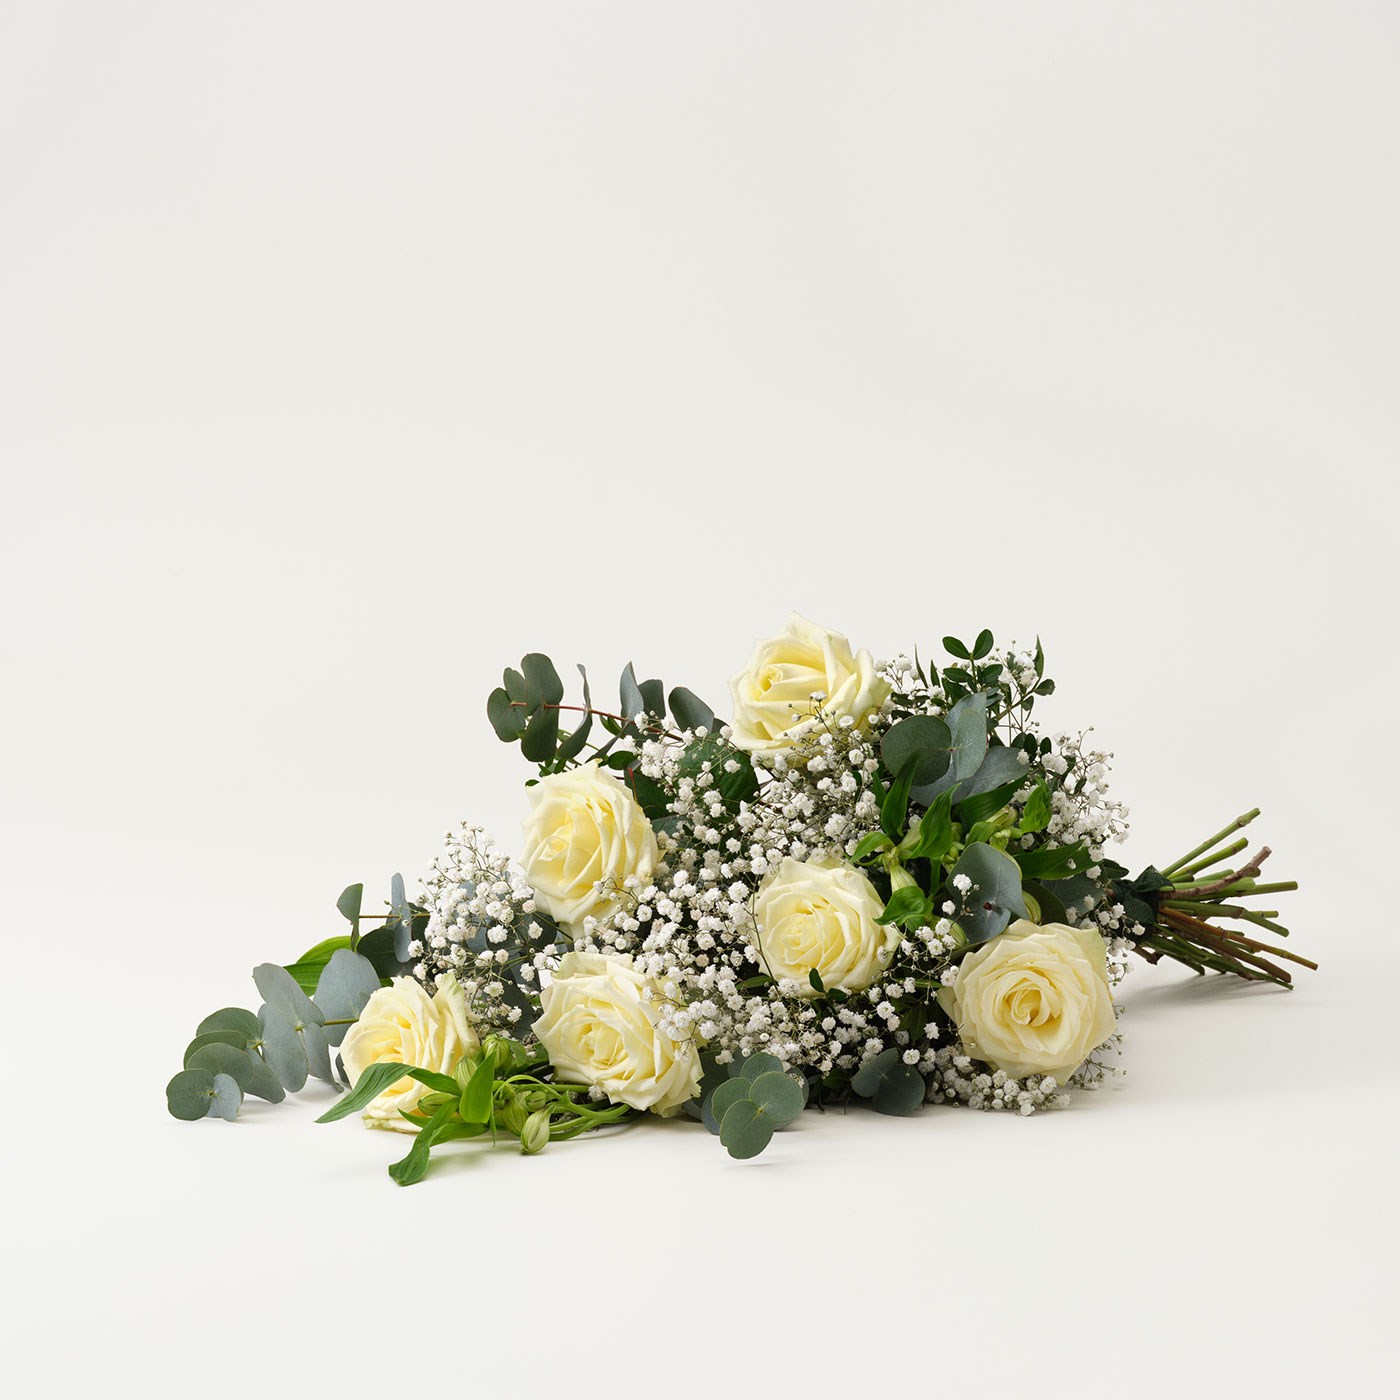 product image for Funeral bouquet in white